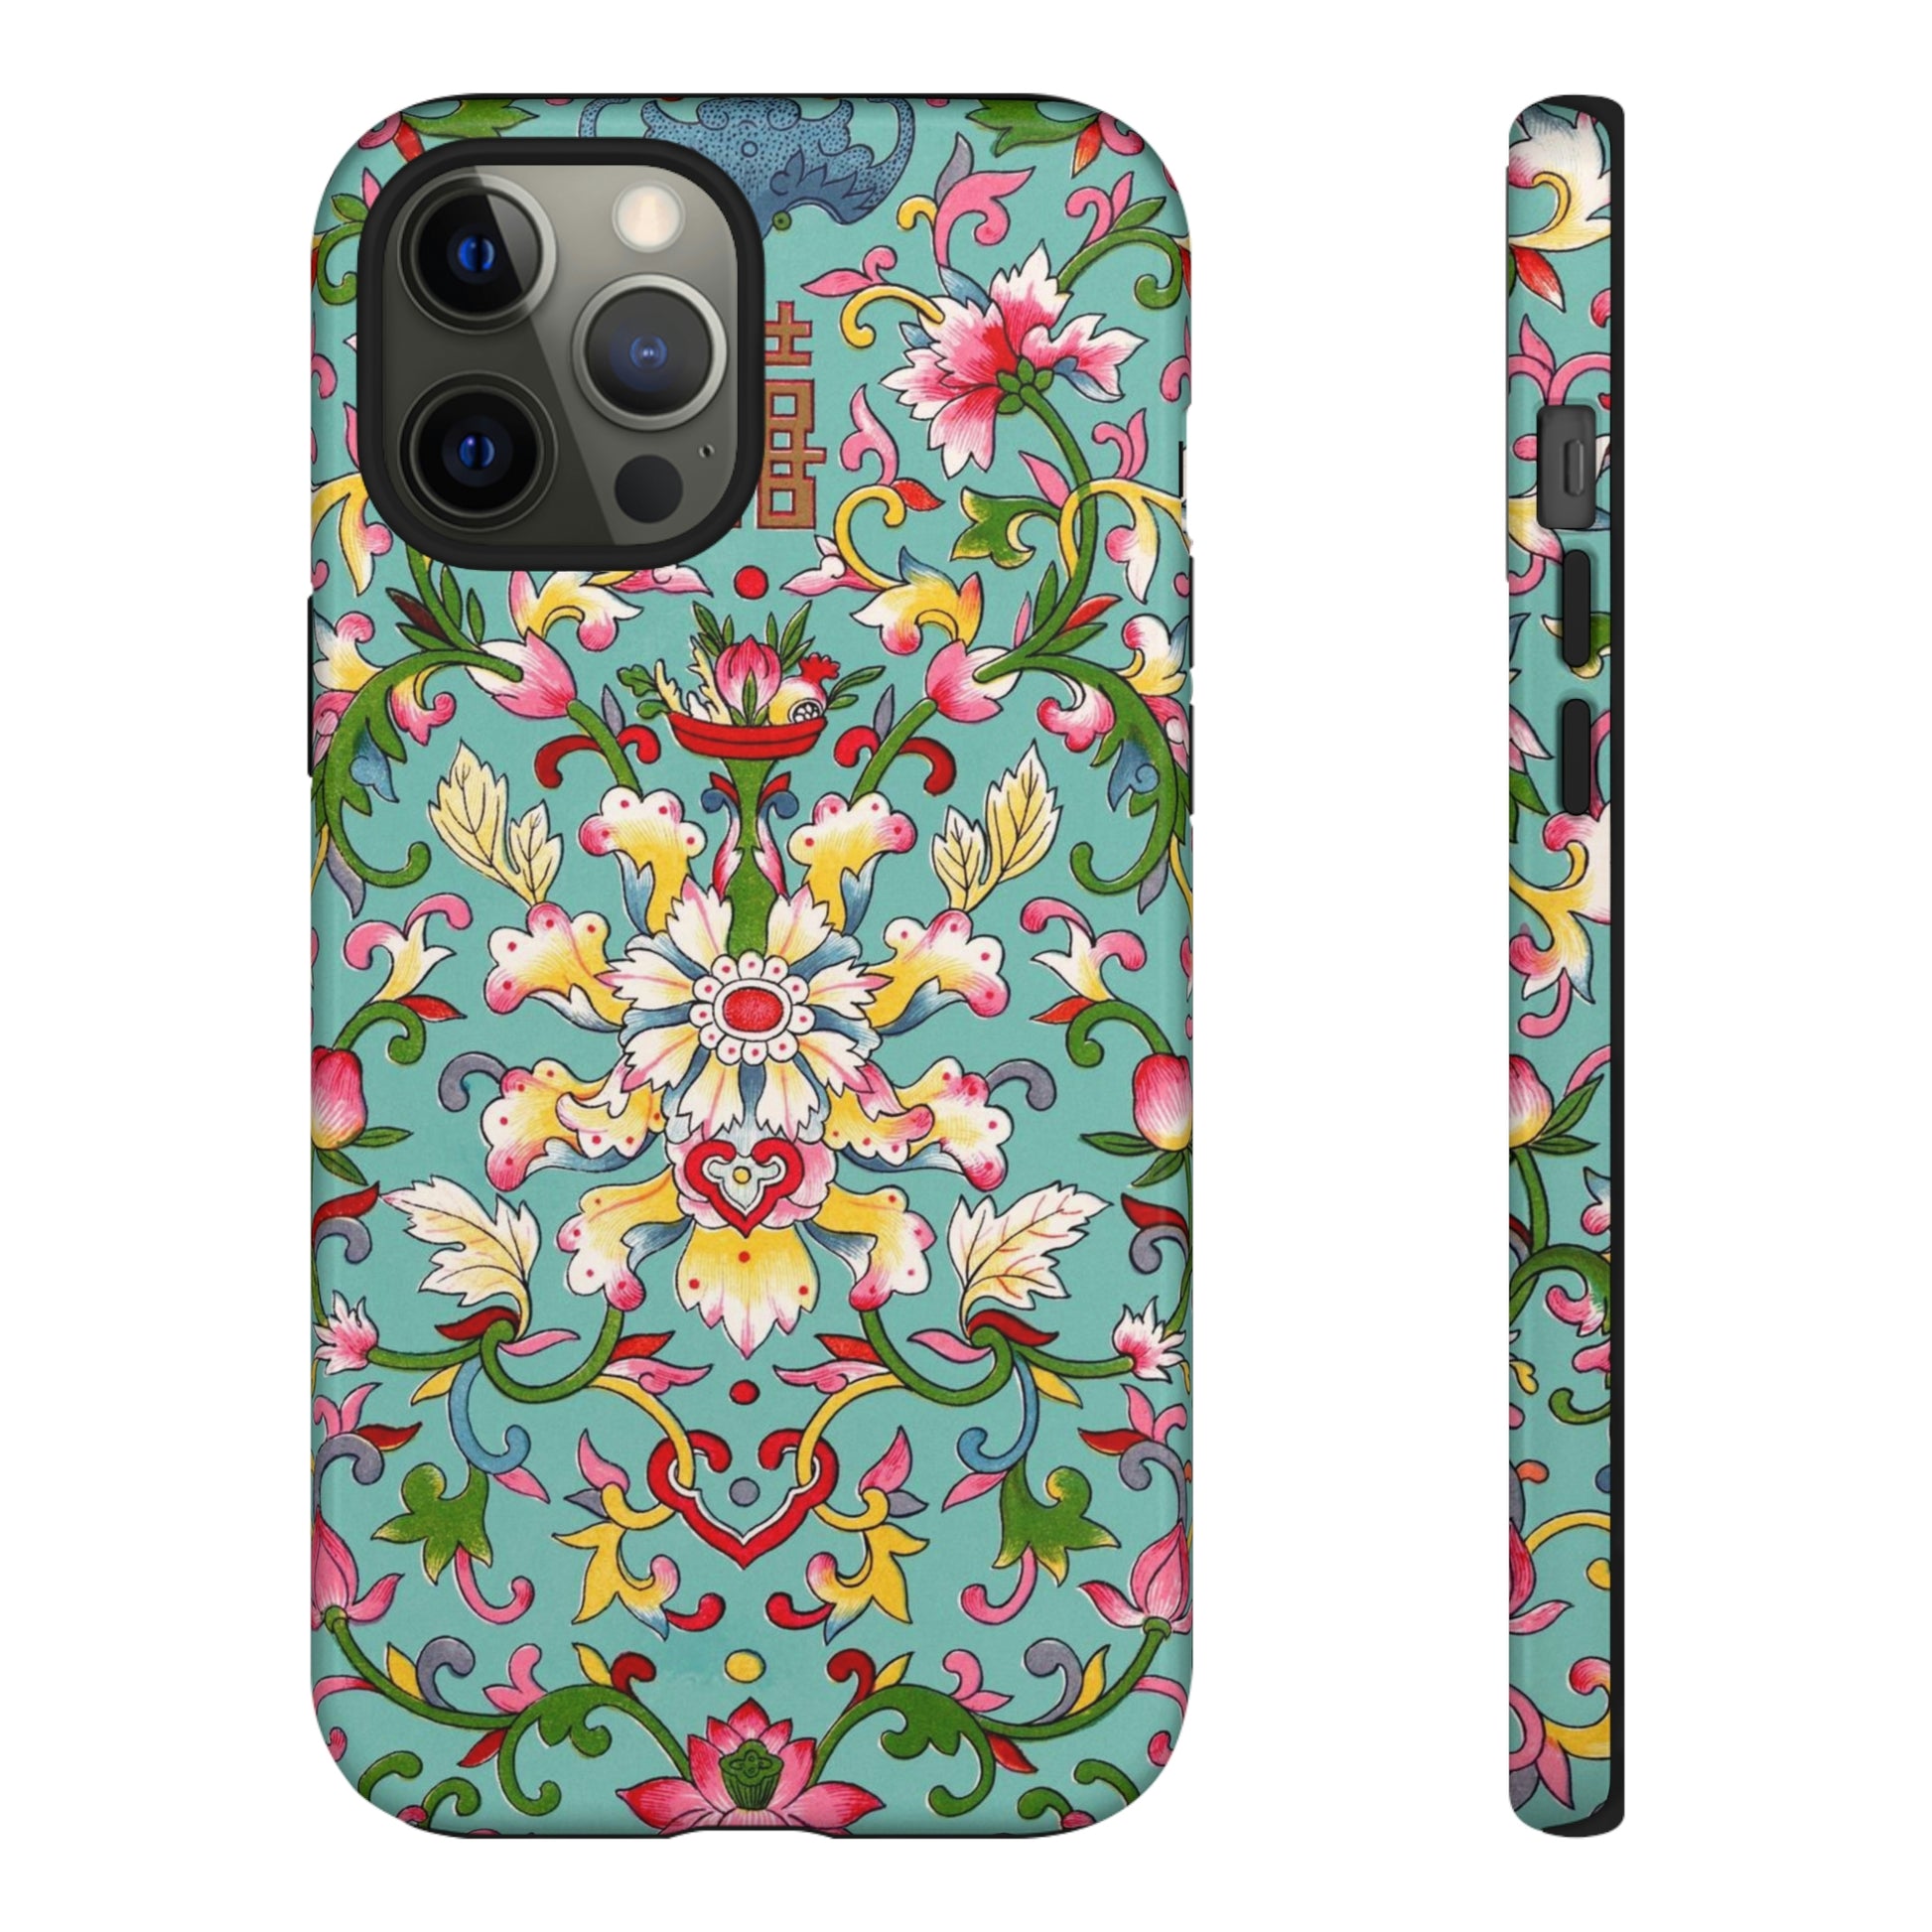 Floral Family Phone Case - BRYKNOLO LLC Phone Case iPhone 12 Pro Max / Glossy